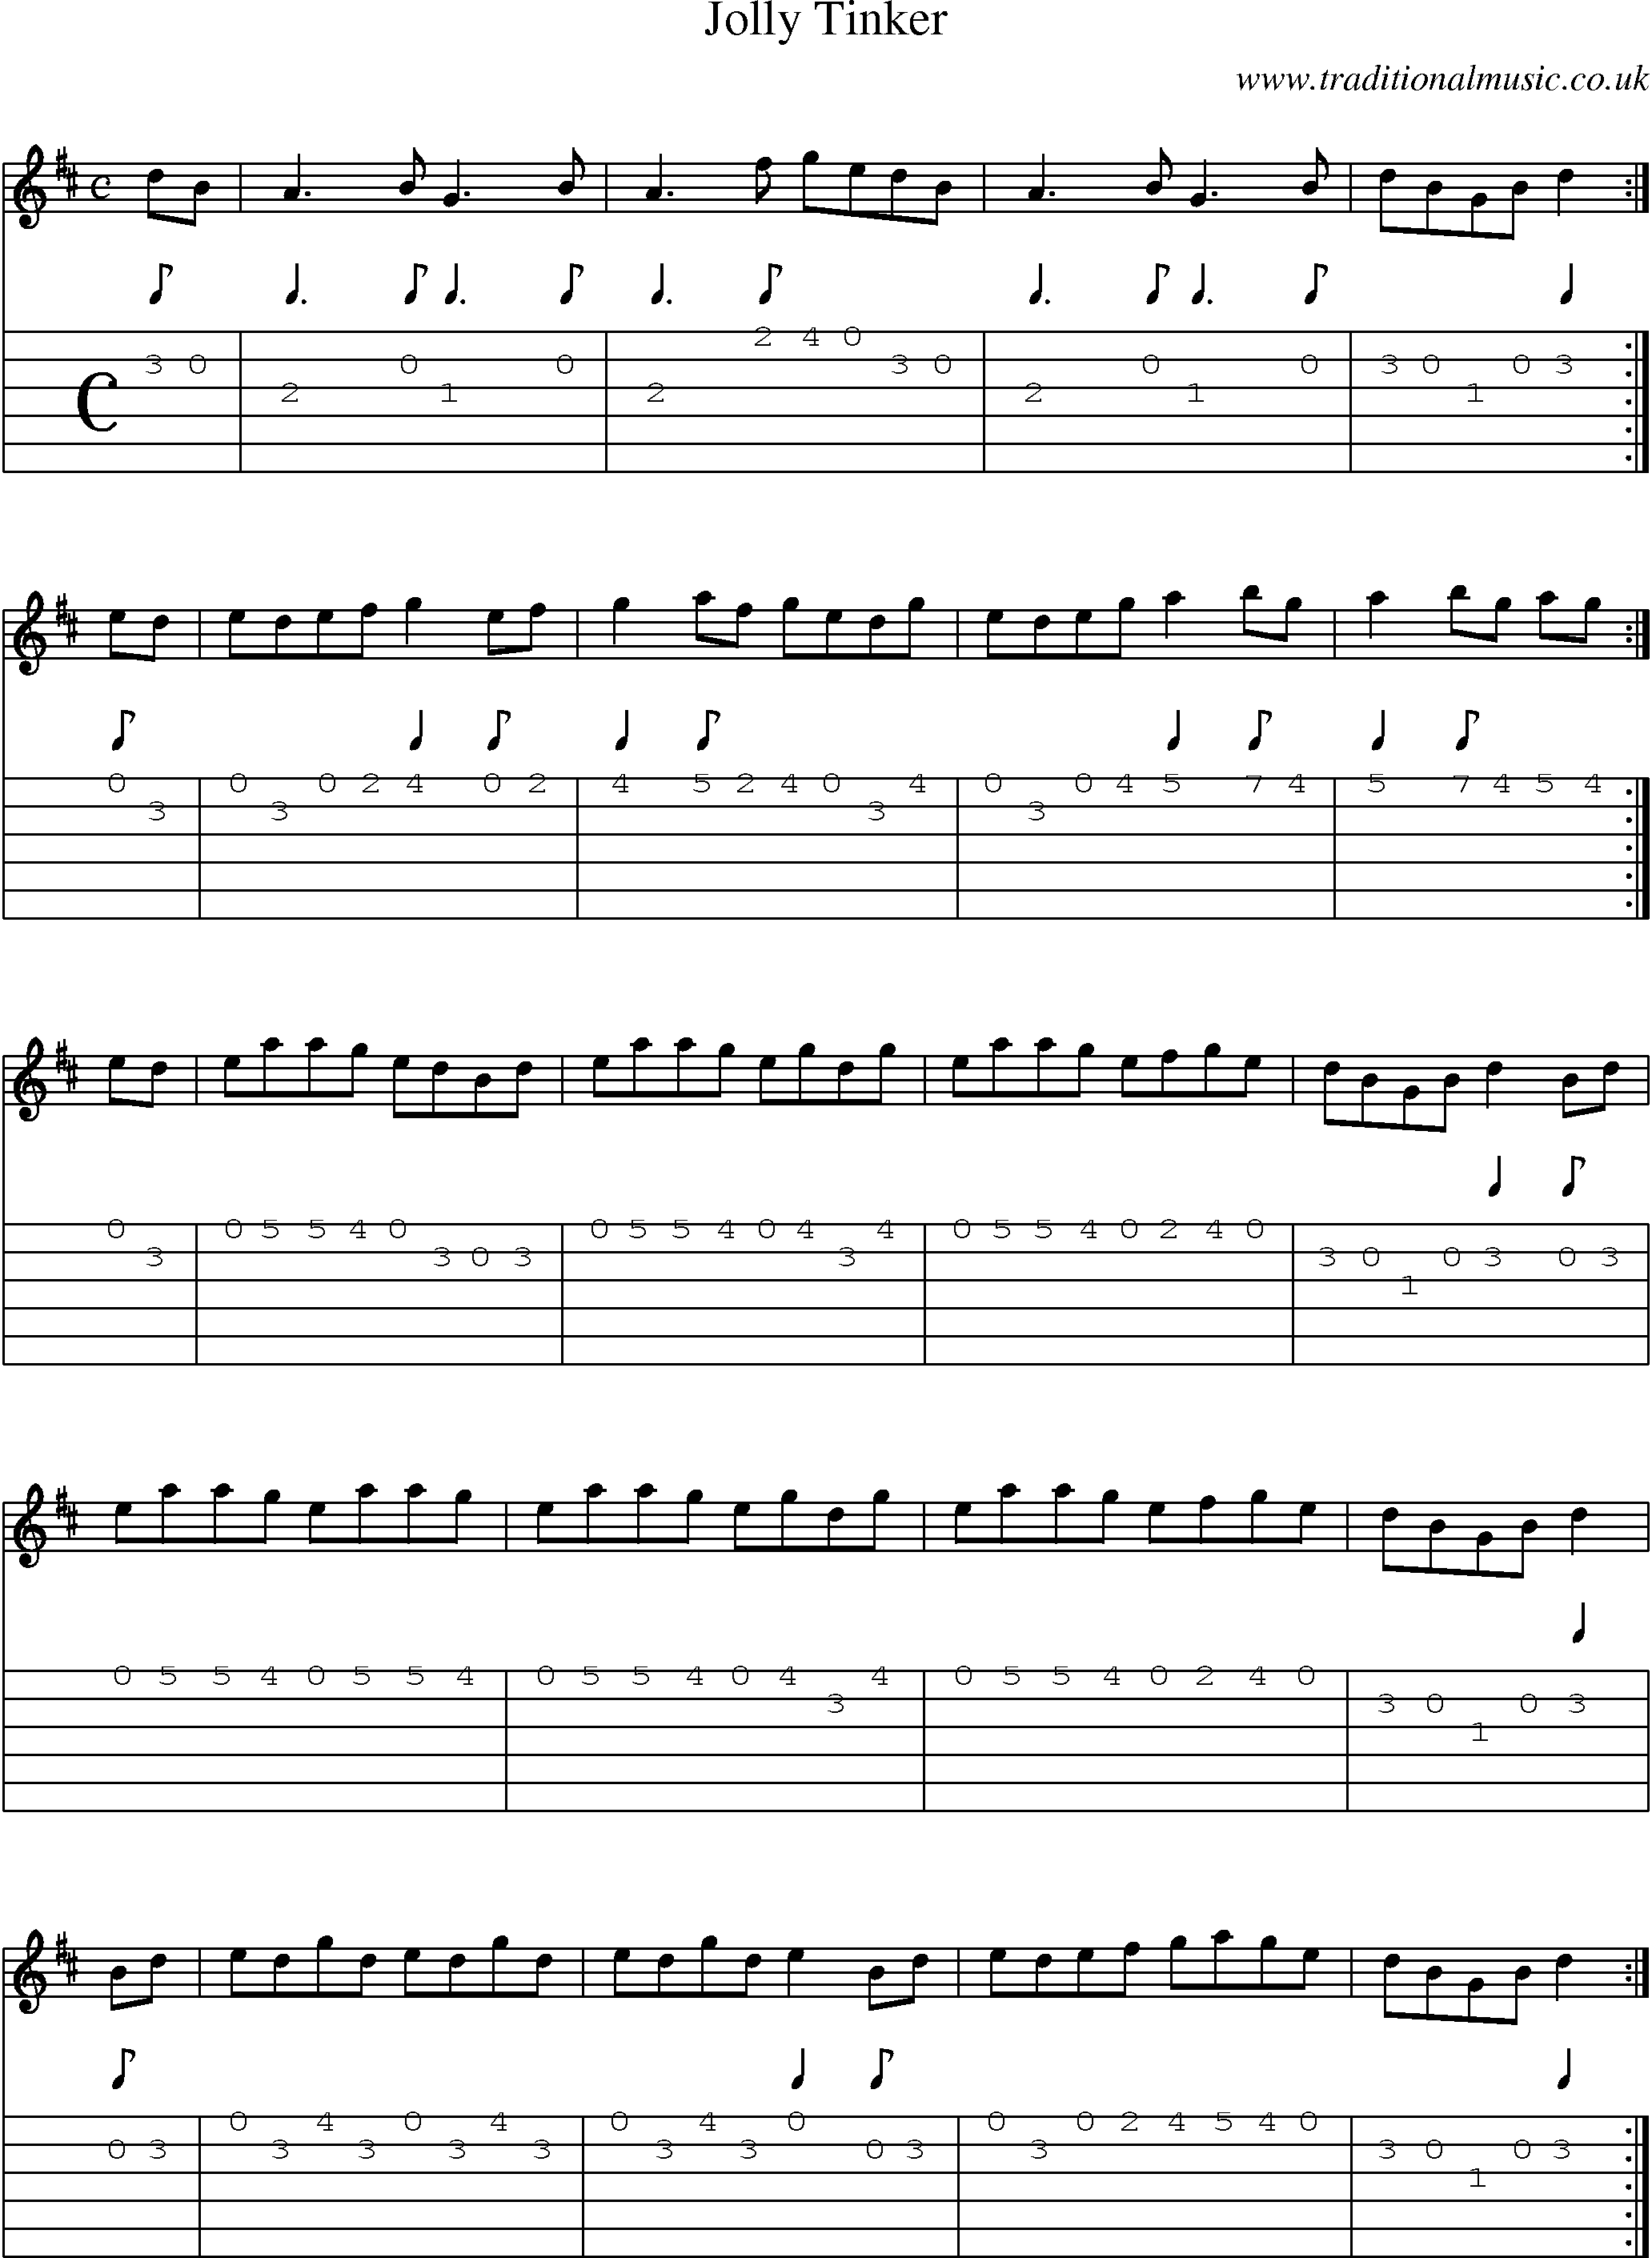 Music Score and Guitar Tabs for Jolly Tinker